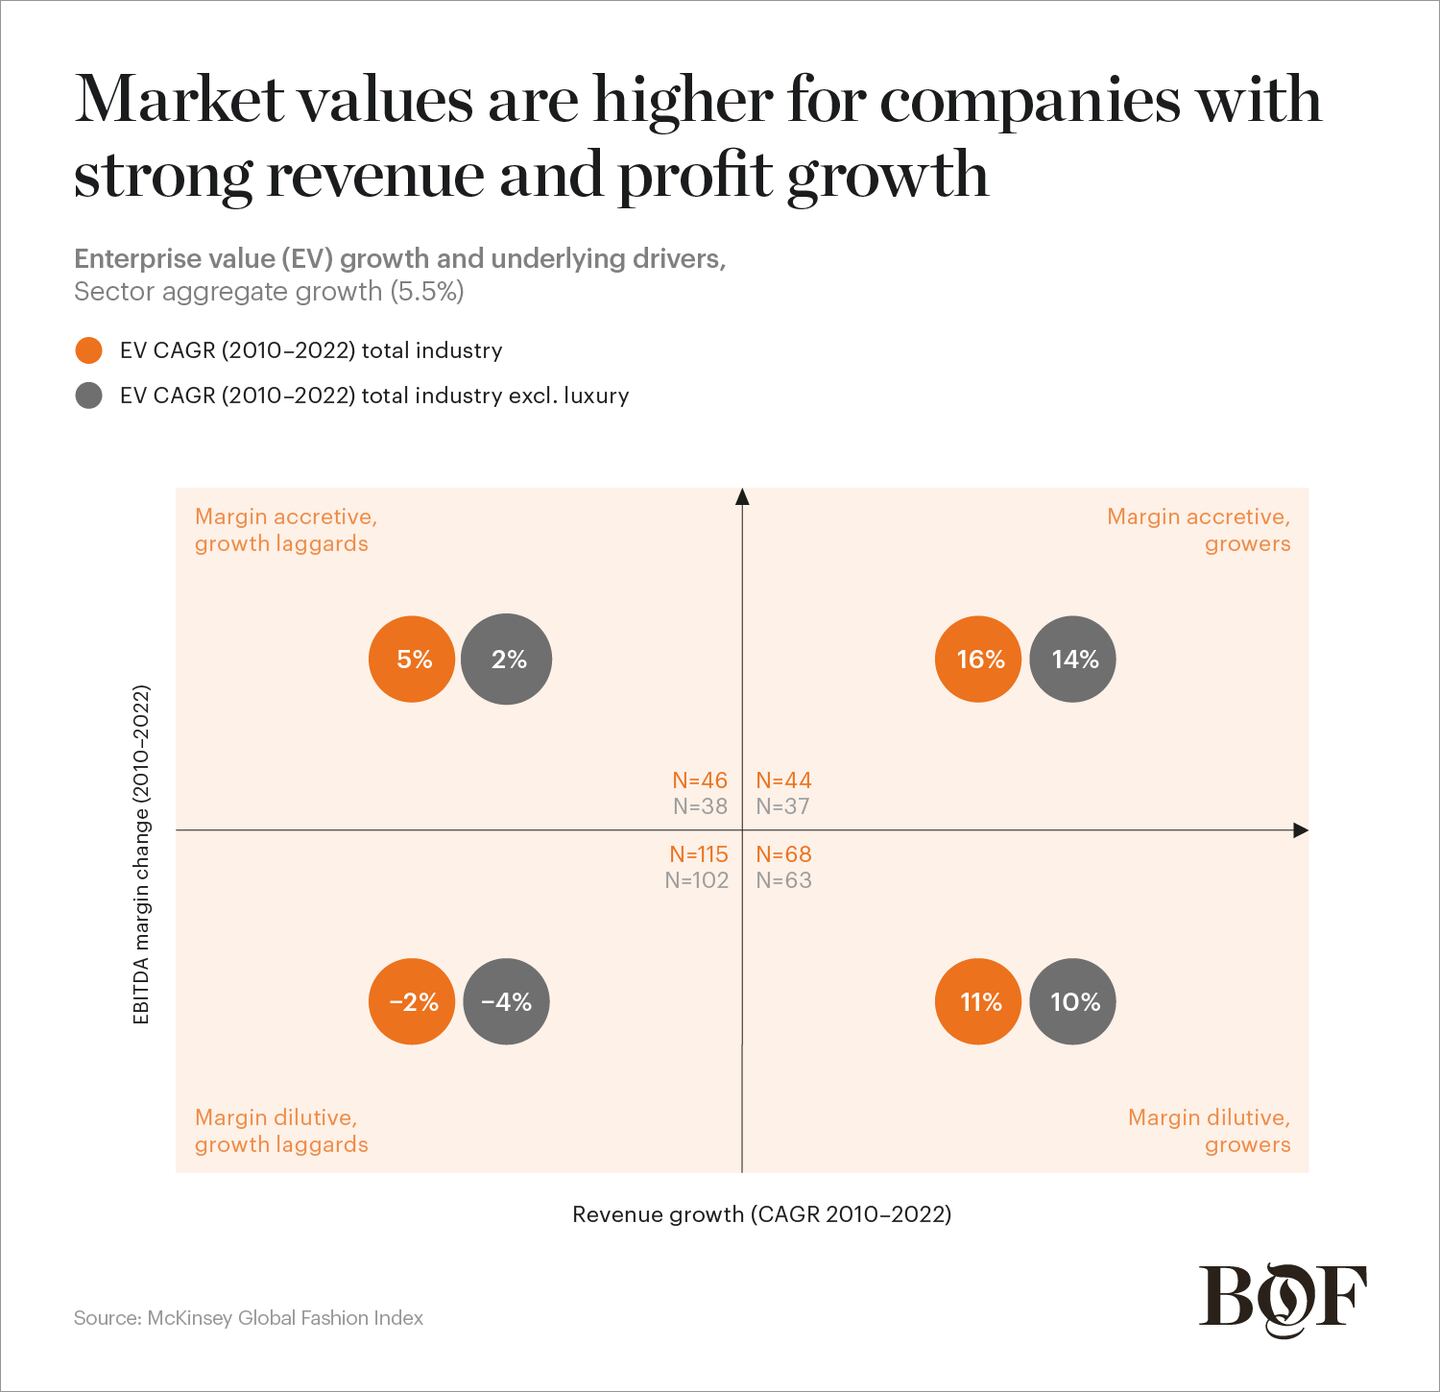 Market values are higher for companies with strong revenue and profit growth